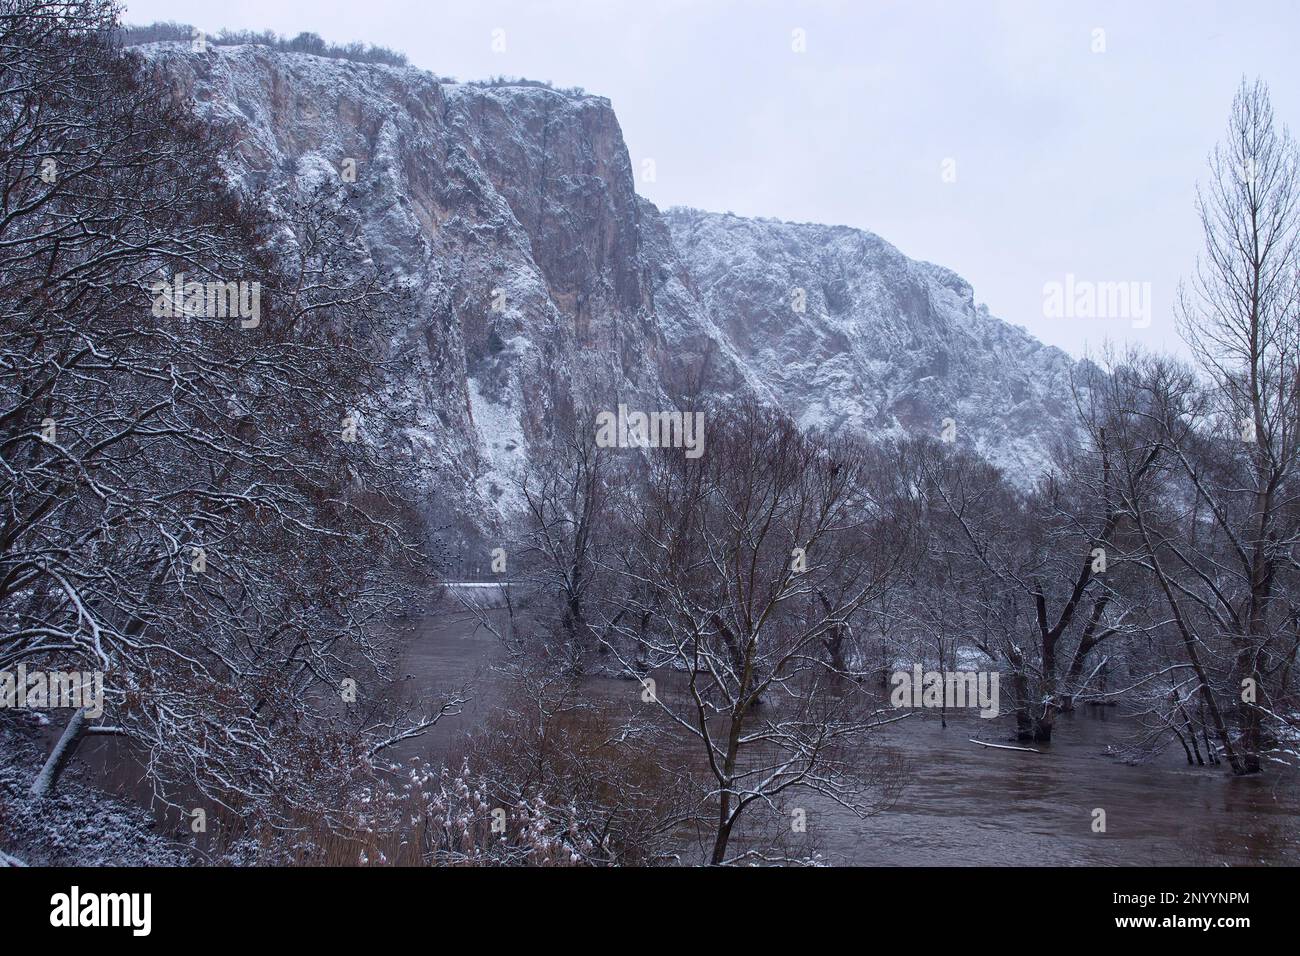 Rotenfels covered in snow next to the Nahe river on a foggy grey winter day in Bad Kreuznach, Germany. Stock Photo